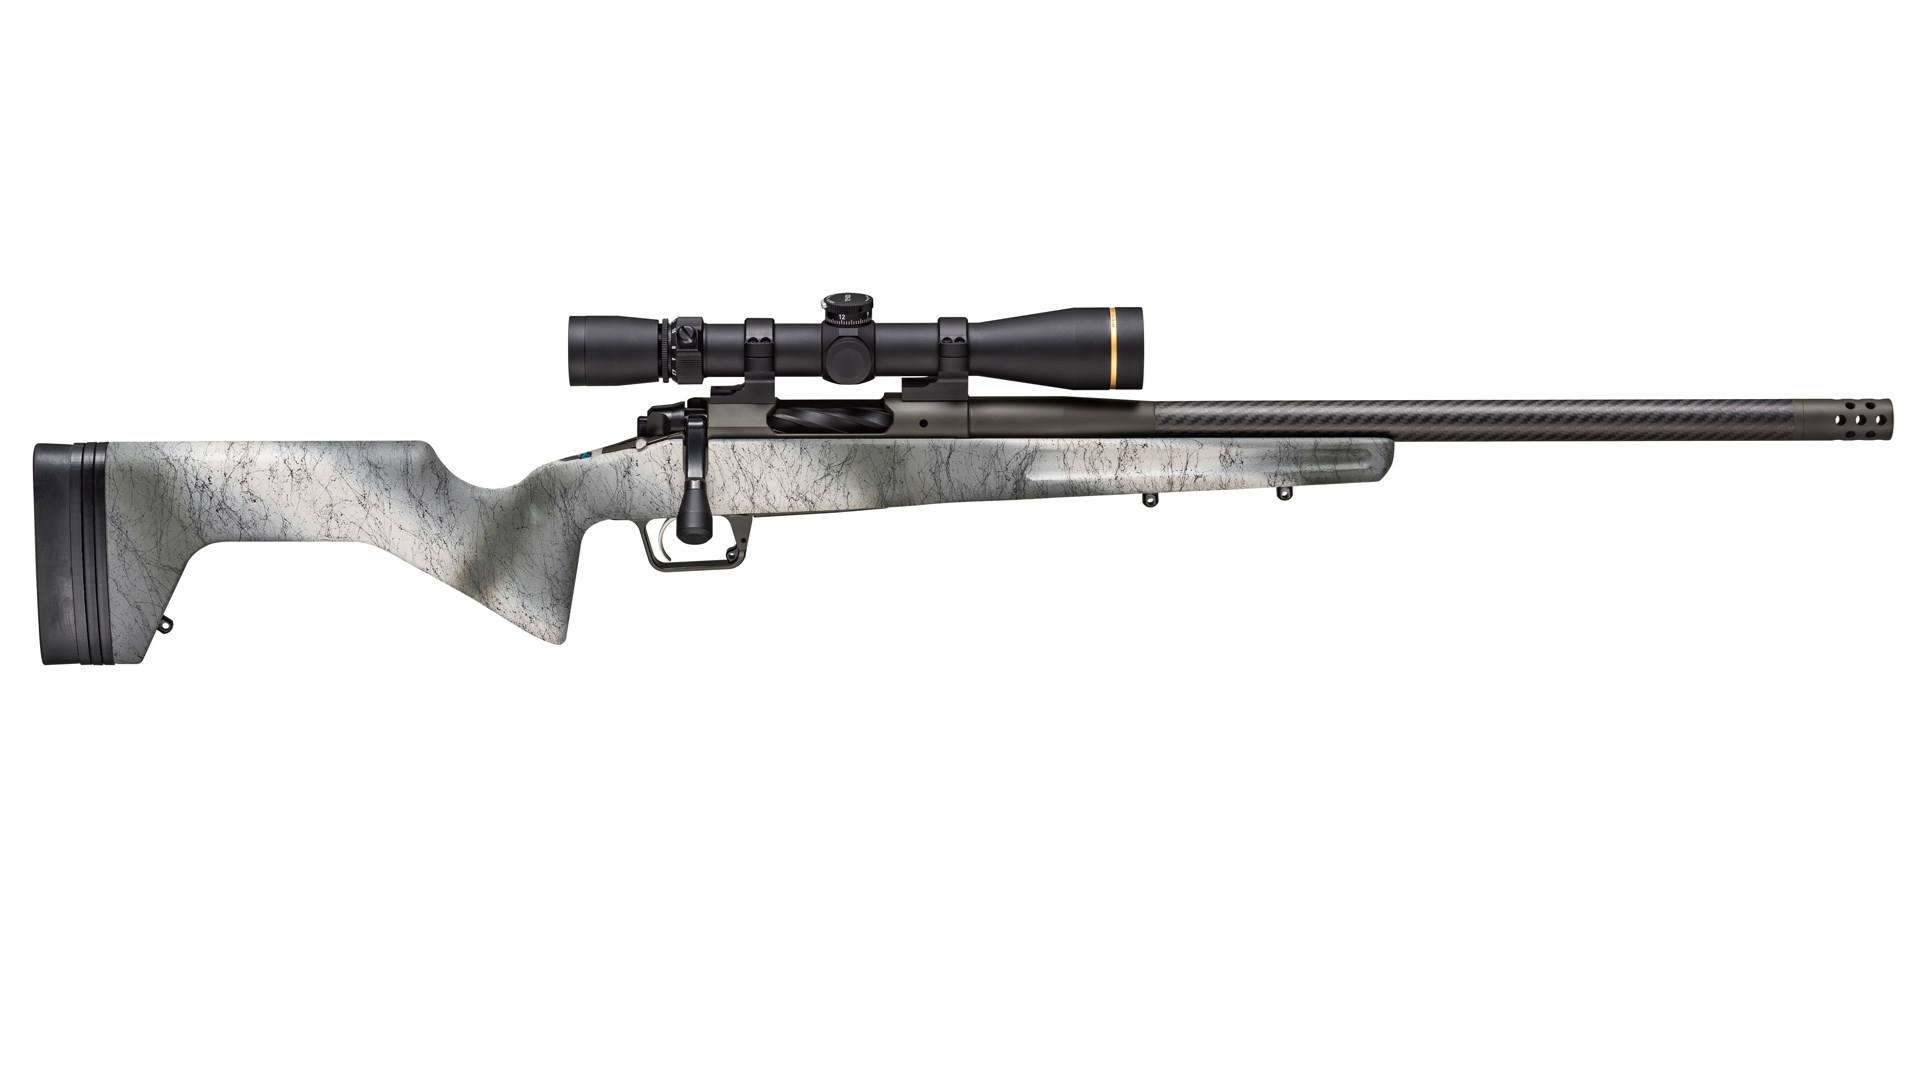 Right side profile of the Springfield Model 2020 Redline bolt-action rifle.